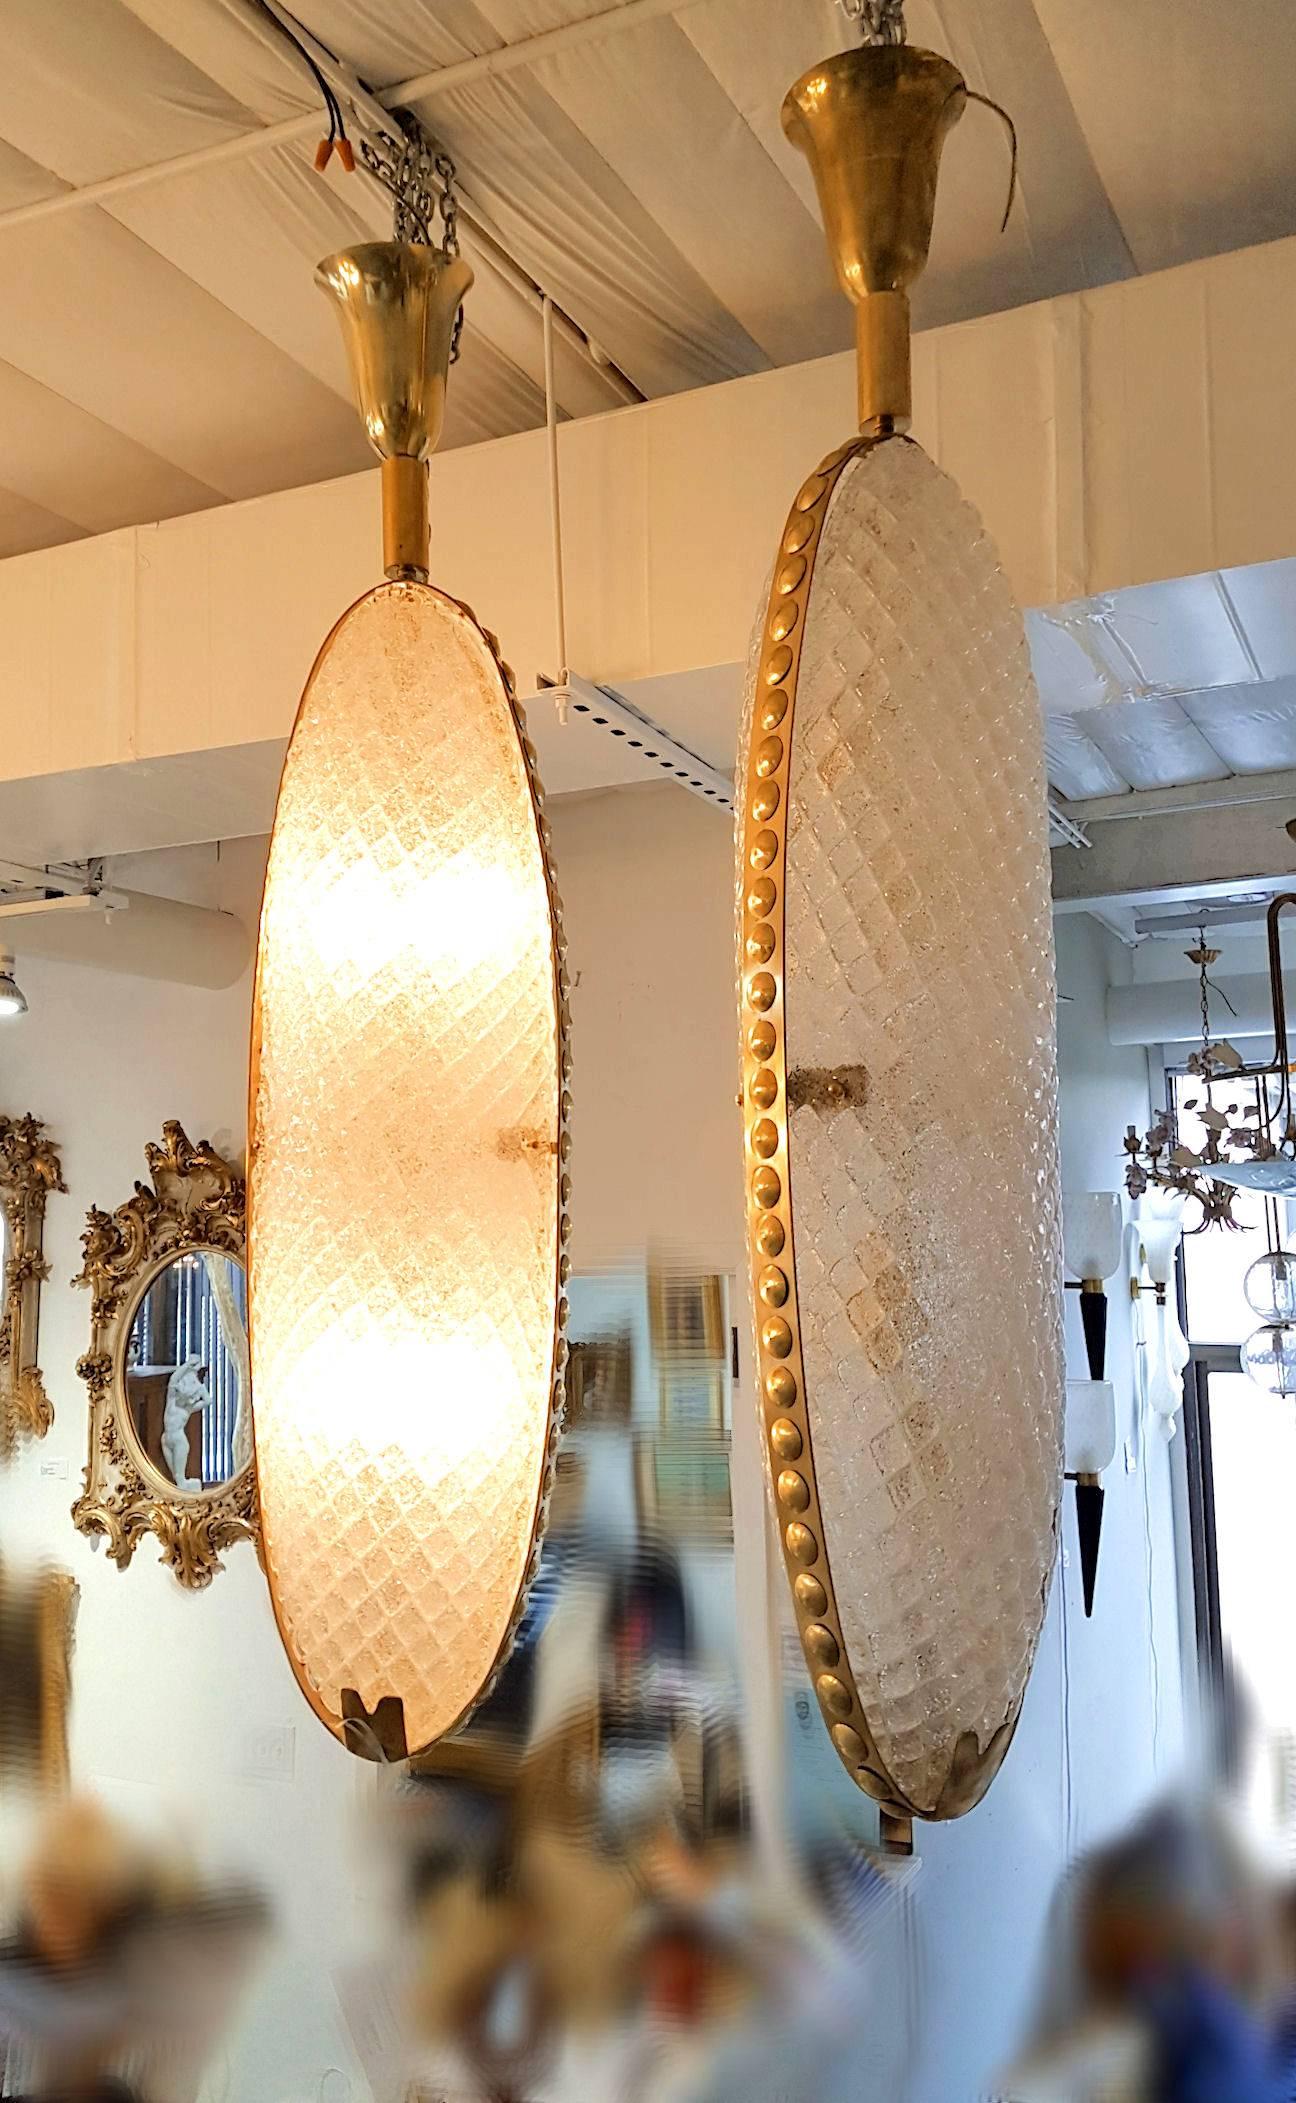 Extra large pair of Mid-Century Modern Murano clear textured translucent Murano glass lanterns or pendants, circled with brass decorative mounts.
Glass is made with Balotton Murano technique, which is a diamond patterned decoration in relief on the